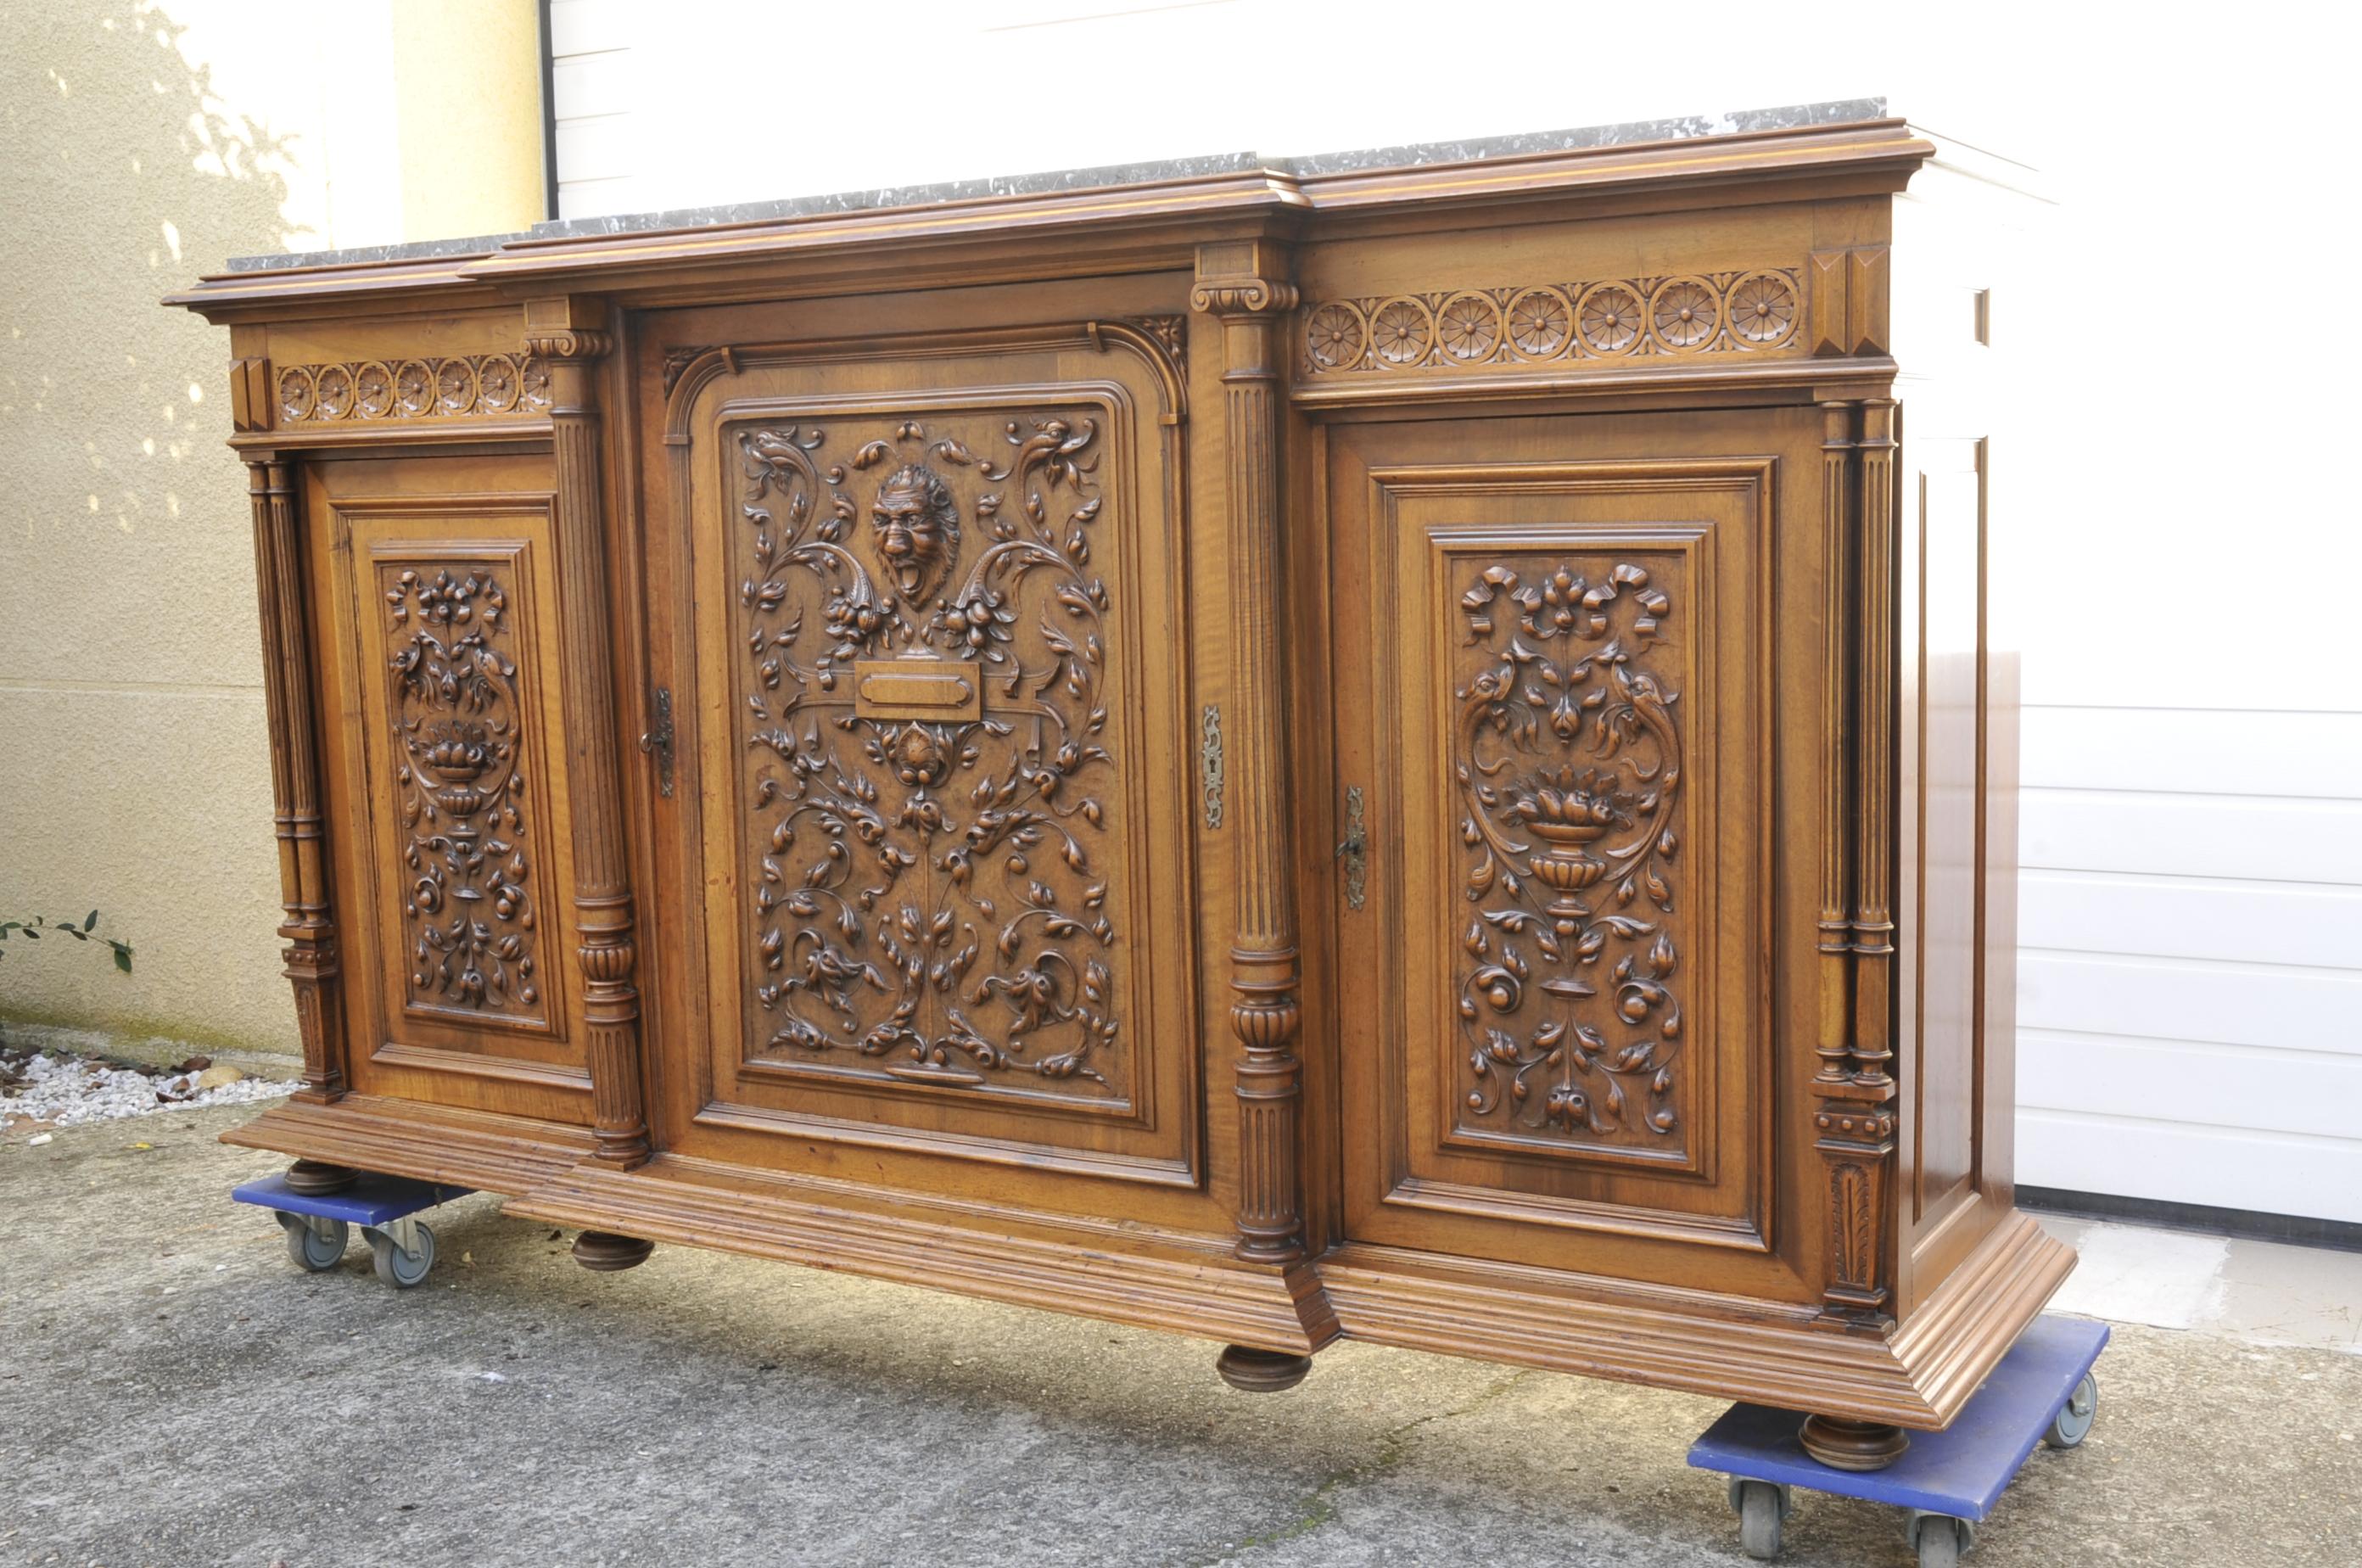 Renaissance-style sideboard in solid walnut opening 3 large doors with richly carved decoration, central projection, thick gray marble top (turquin blue), 6 detached columns on the front.

Good quality, dark oak.

Very imposing